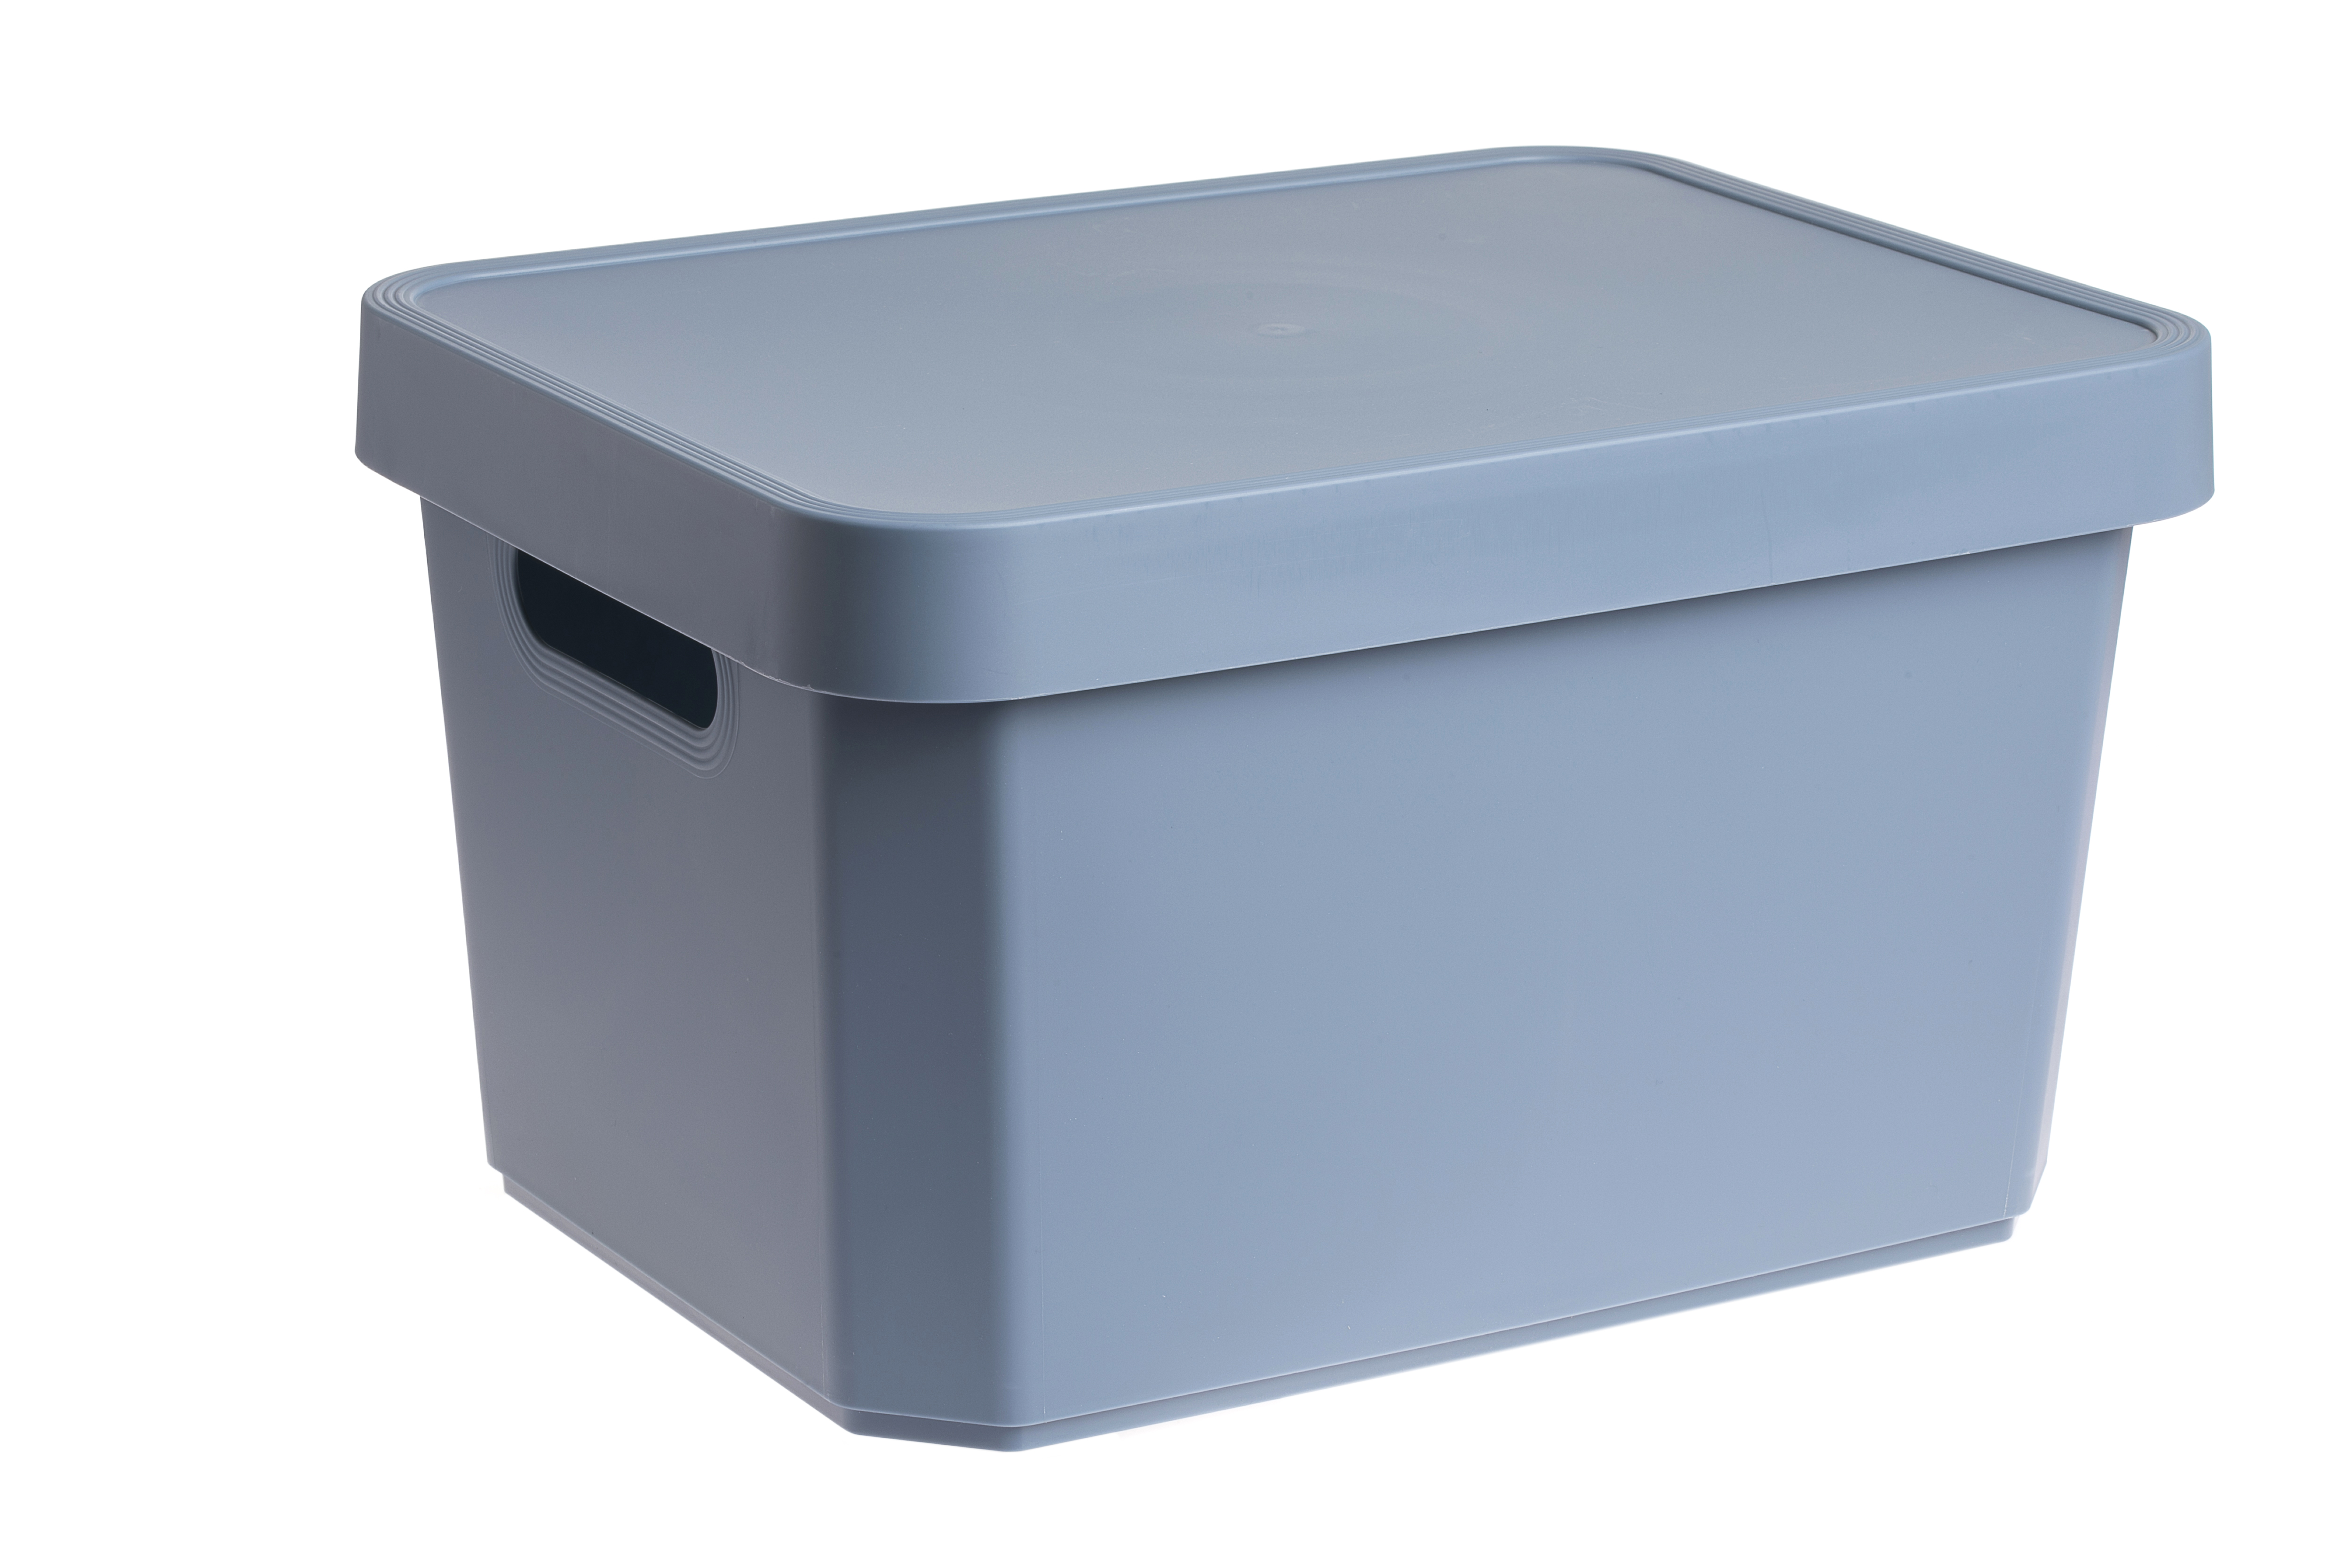 CYCLOPS STORAGE BOX CAVE 17L WITH LID BLUE